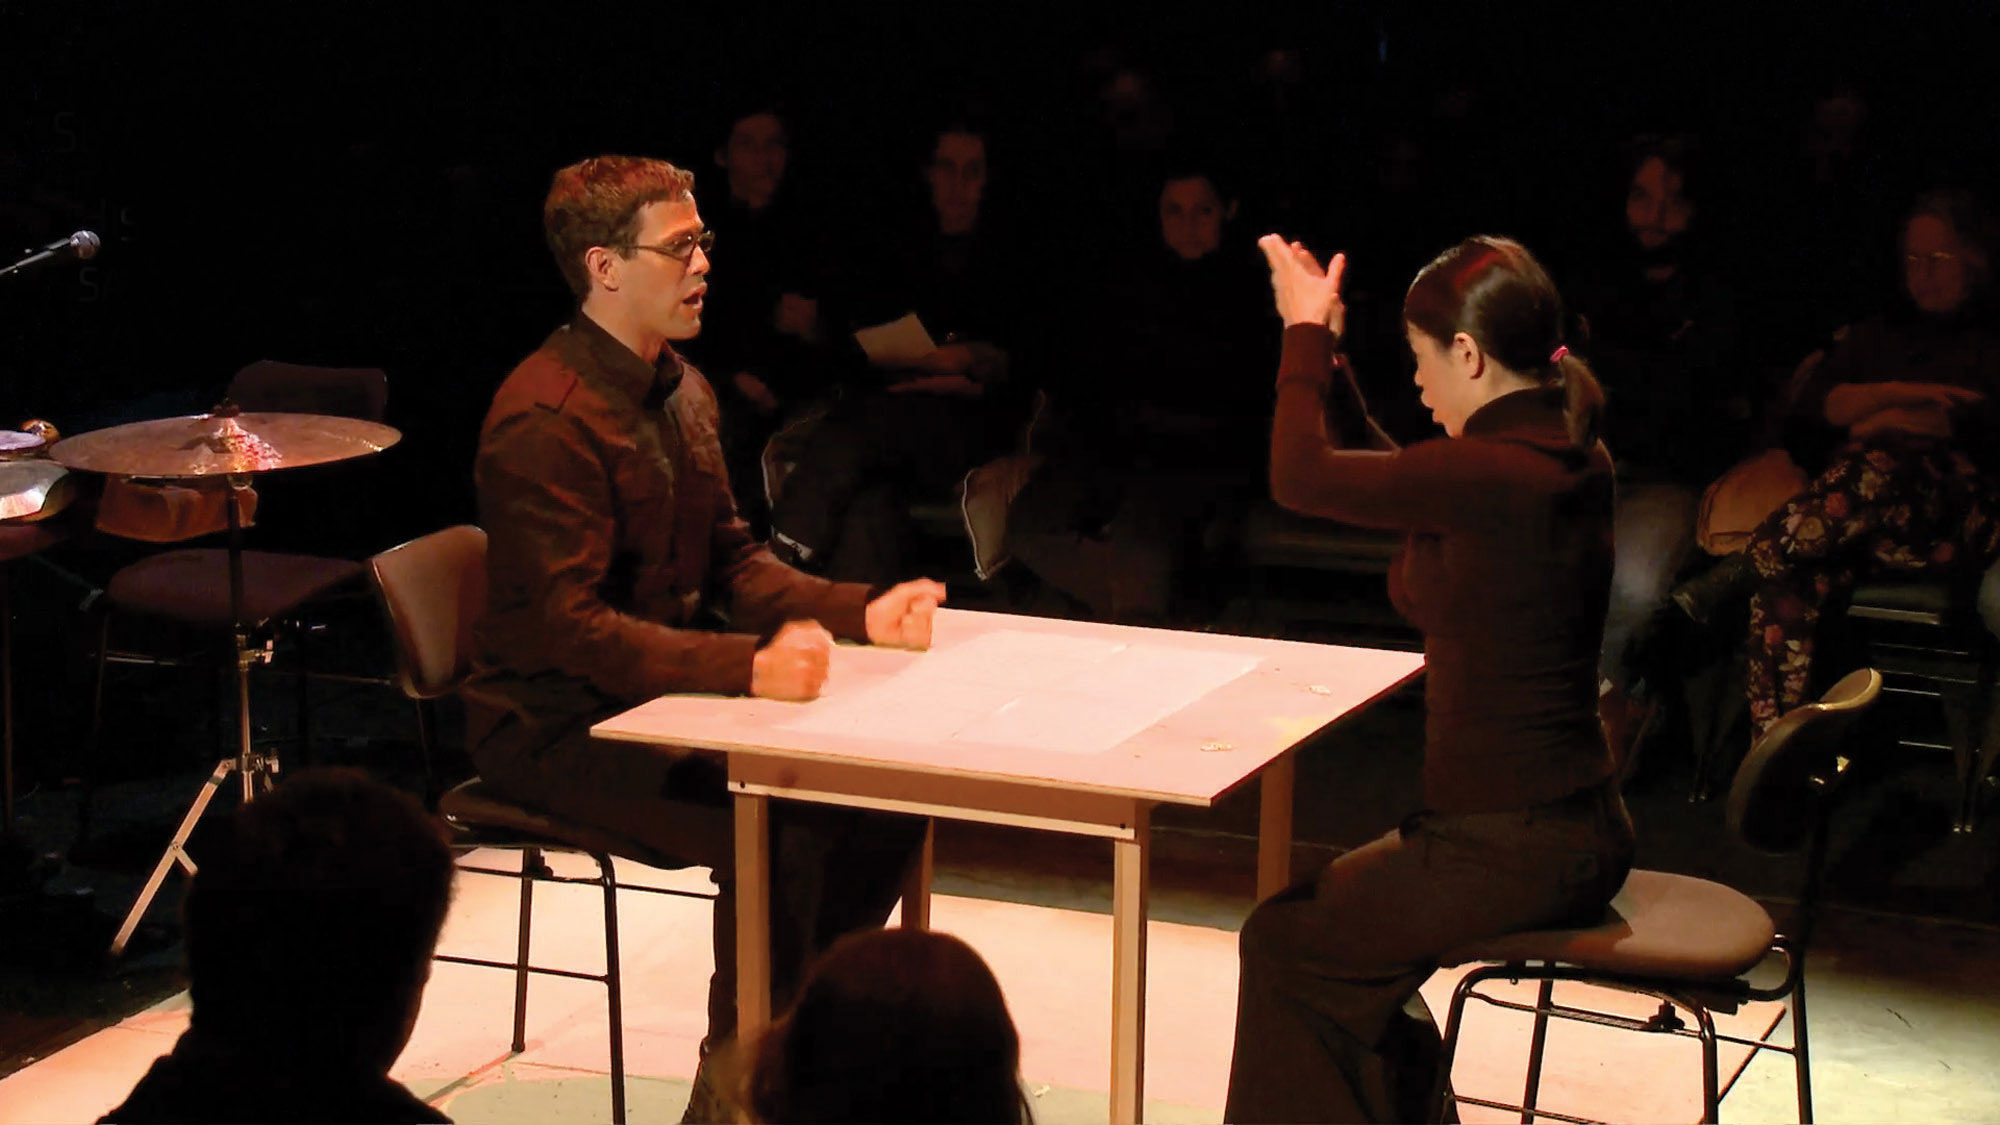 Two people seated at a small square table on a stage. The woman has her hand in a clapping motion above her head. The man looks t hr with mouth open and hands on table in fists. 